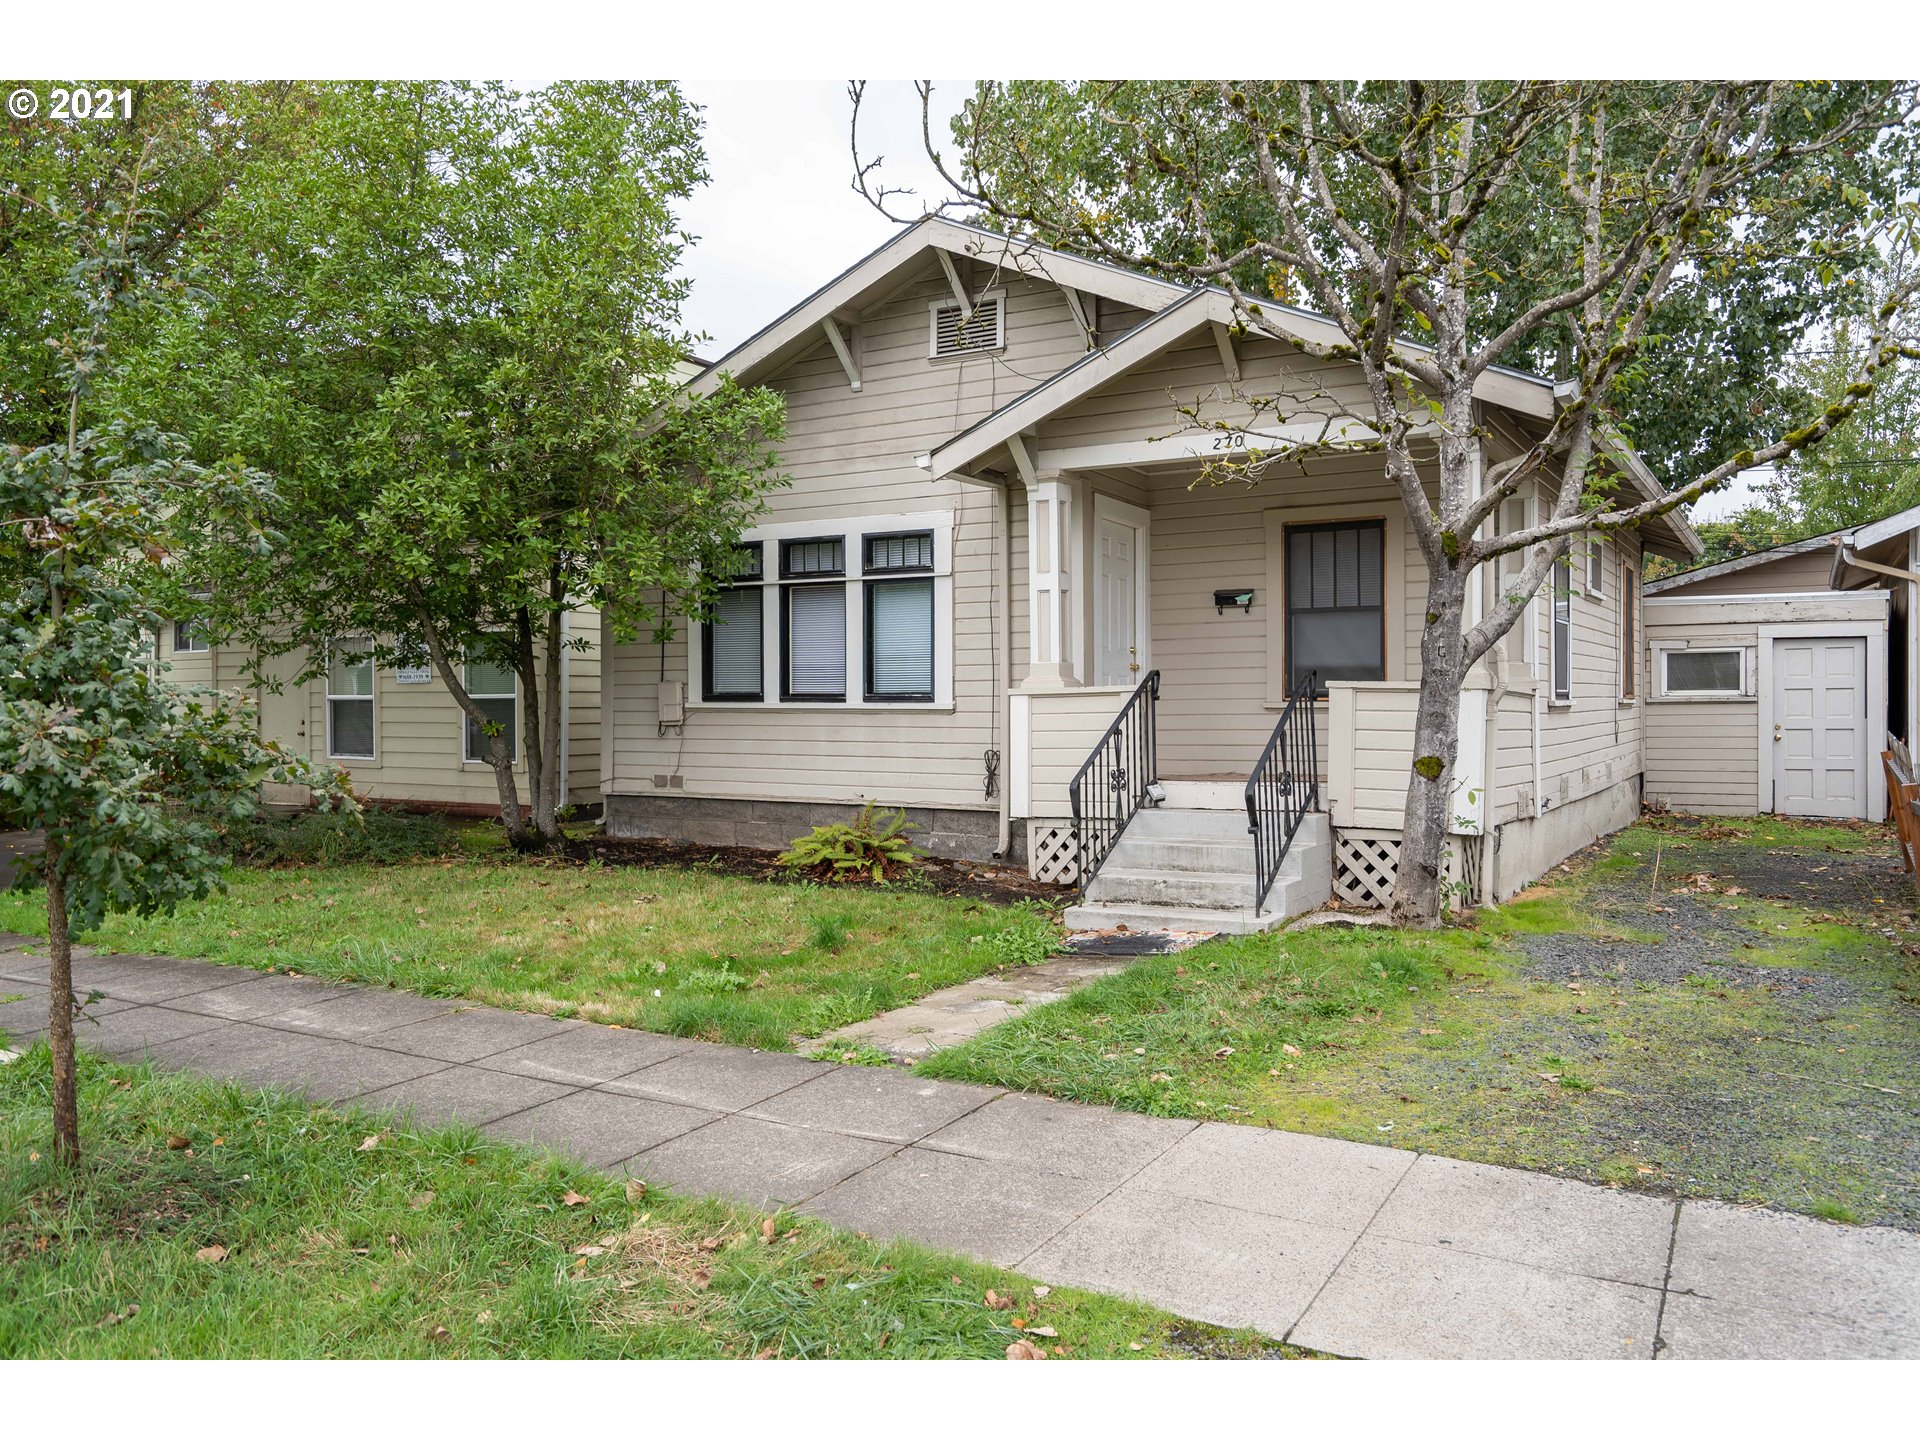 270 E 16TH AVE (1 of 22)